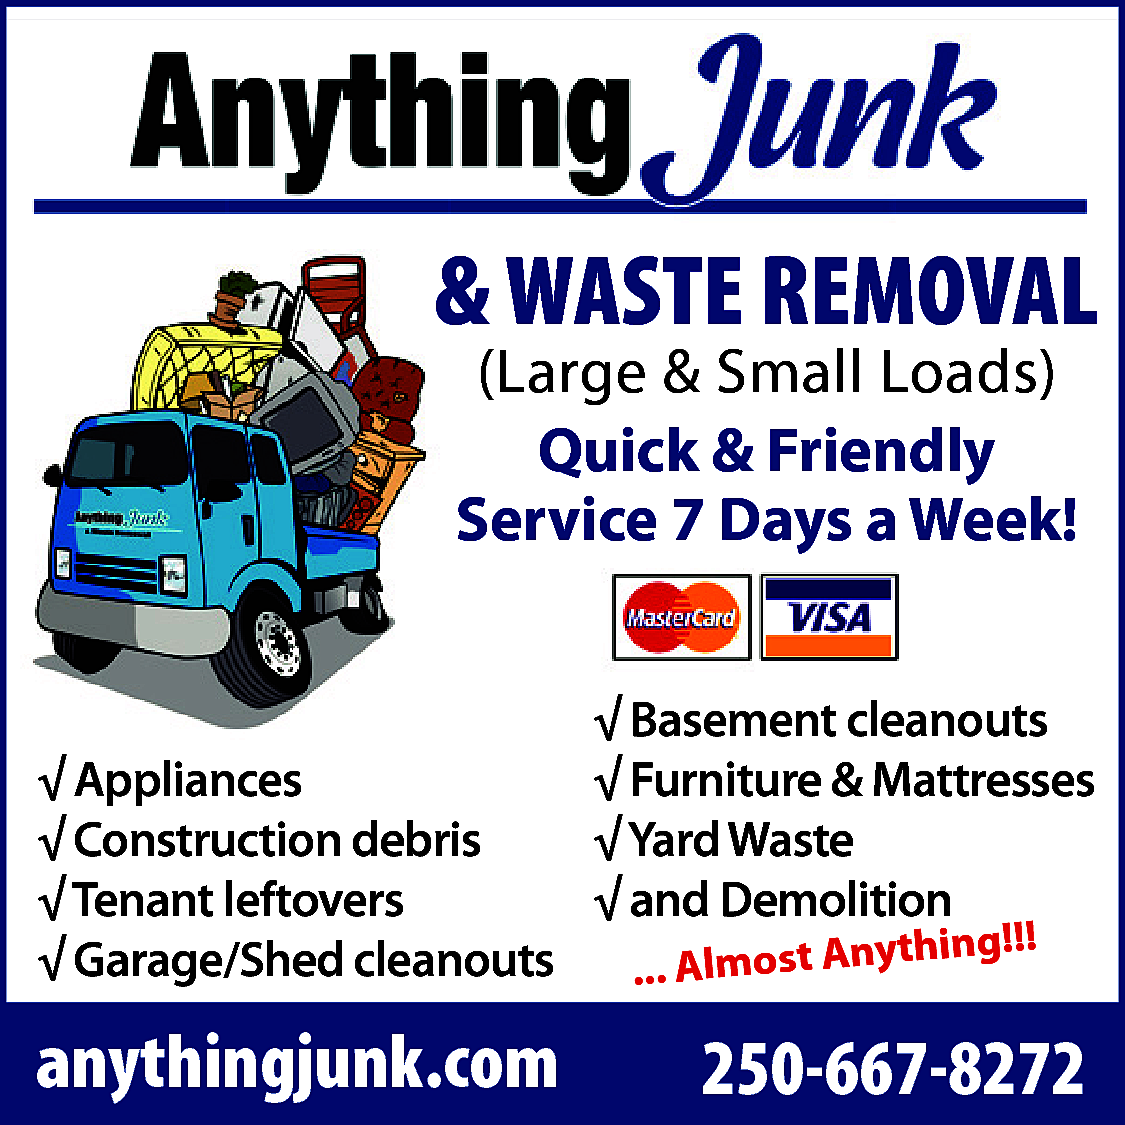 & WASTE REMOVAL <br>(Large &  & WASTE REMOVAL  (Large & Small Loads)  Quick & Friendly  Service 7 Days a Week!    √ Basement cleanouts  √ Appliances  √ Furniture & Mattresses  √ Construction debris  √ Yard Waste  √ Tenant leftovers  √ and Demolition  hing!!!  √ Garage/Shed cleanouts  ... Almost Anyt    anythingjunk.com    250-667-8272    